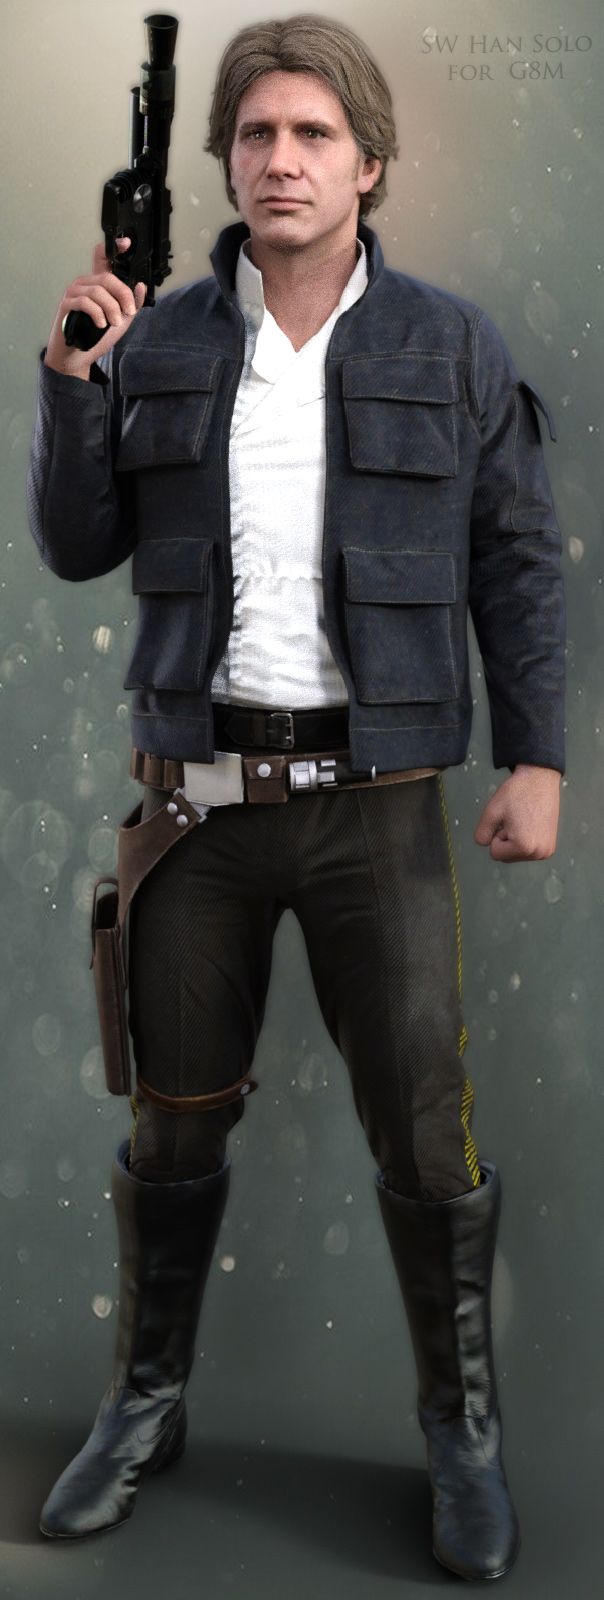 co SW Han Solo for G8M 2067 Promo 02